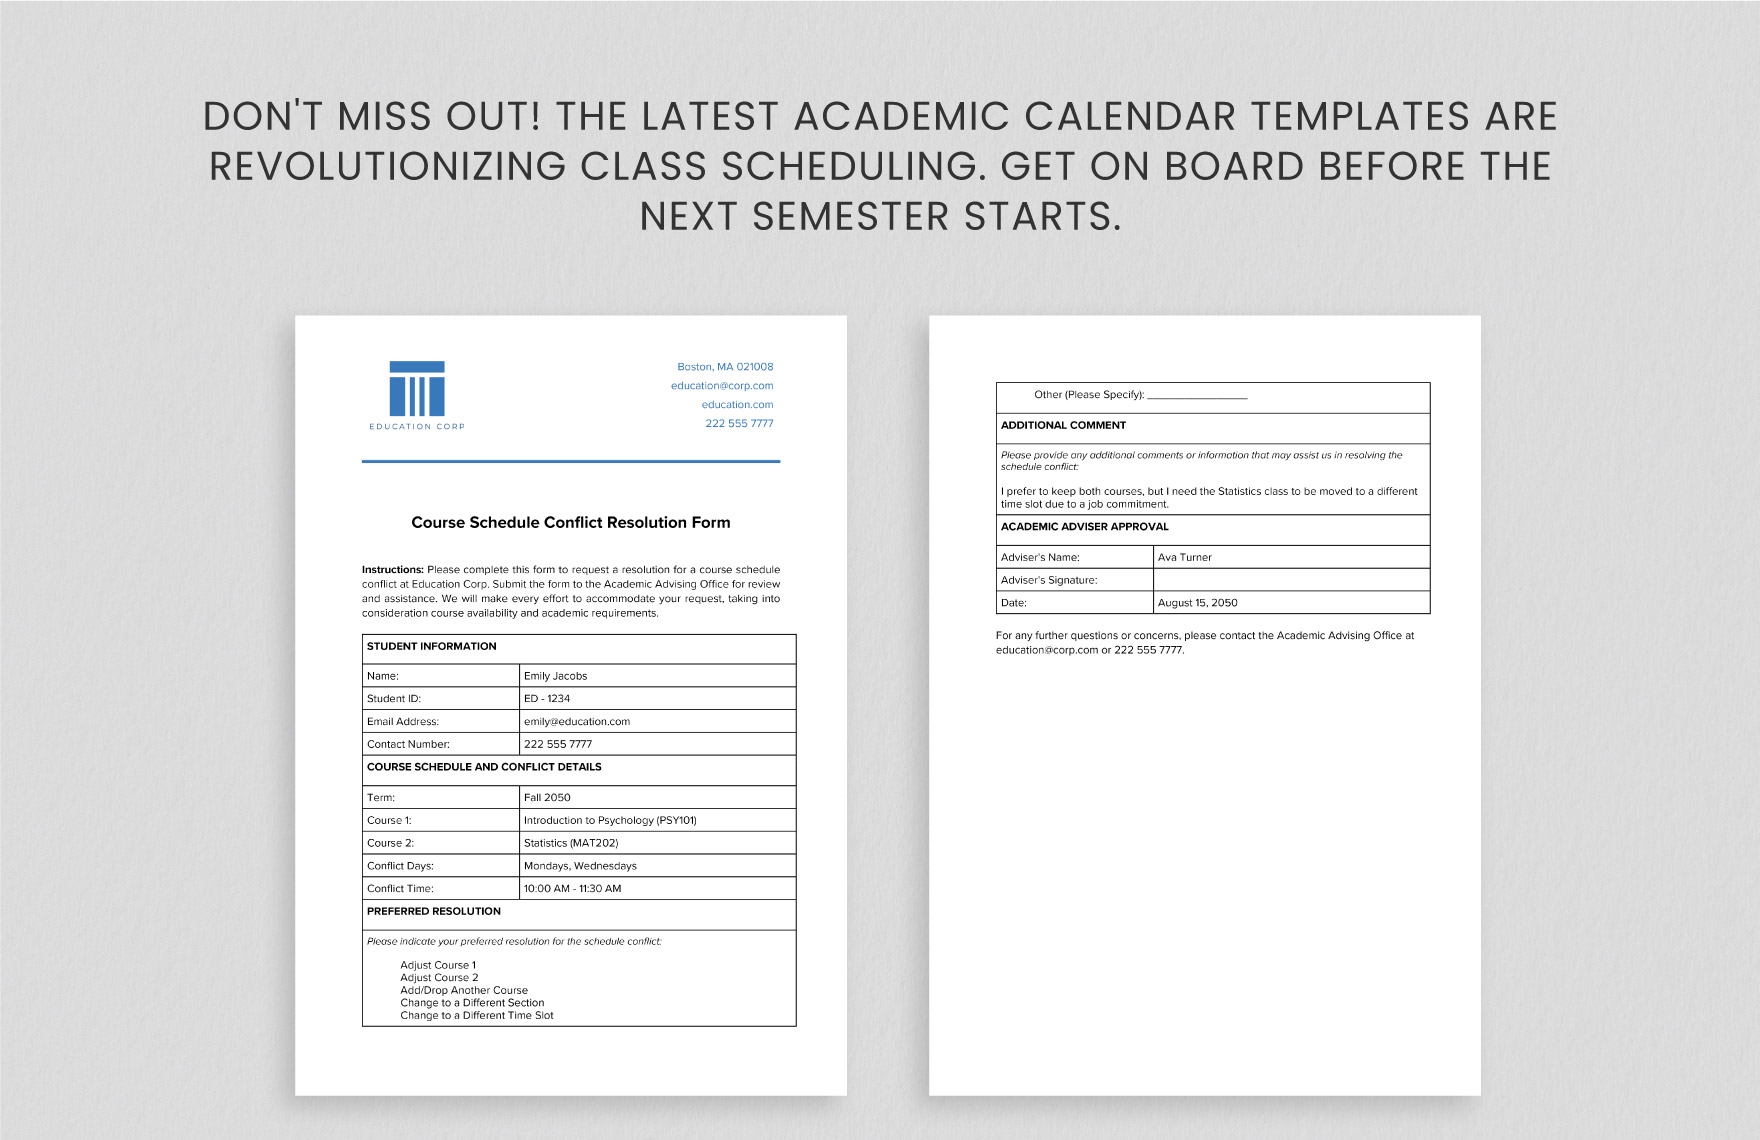 Course Schedule Conflict Resolution Form Template